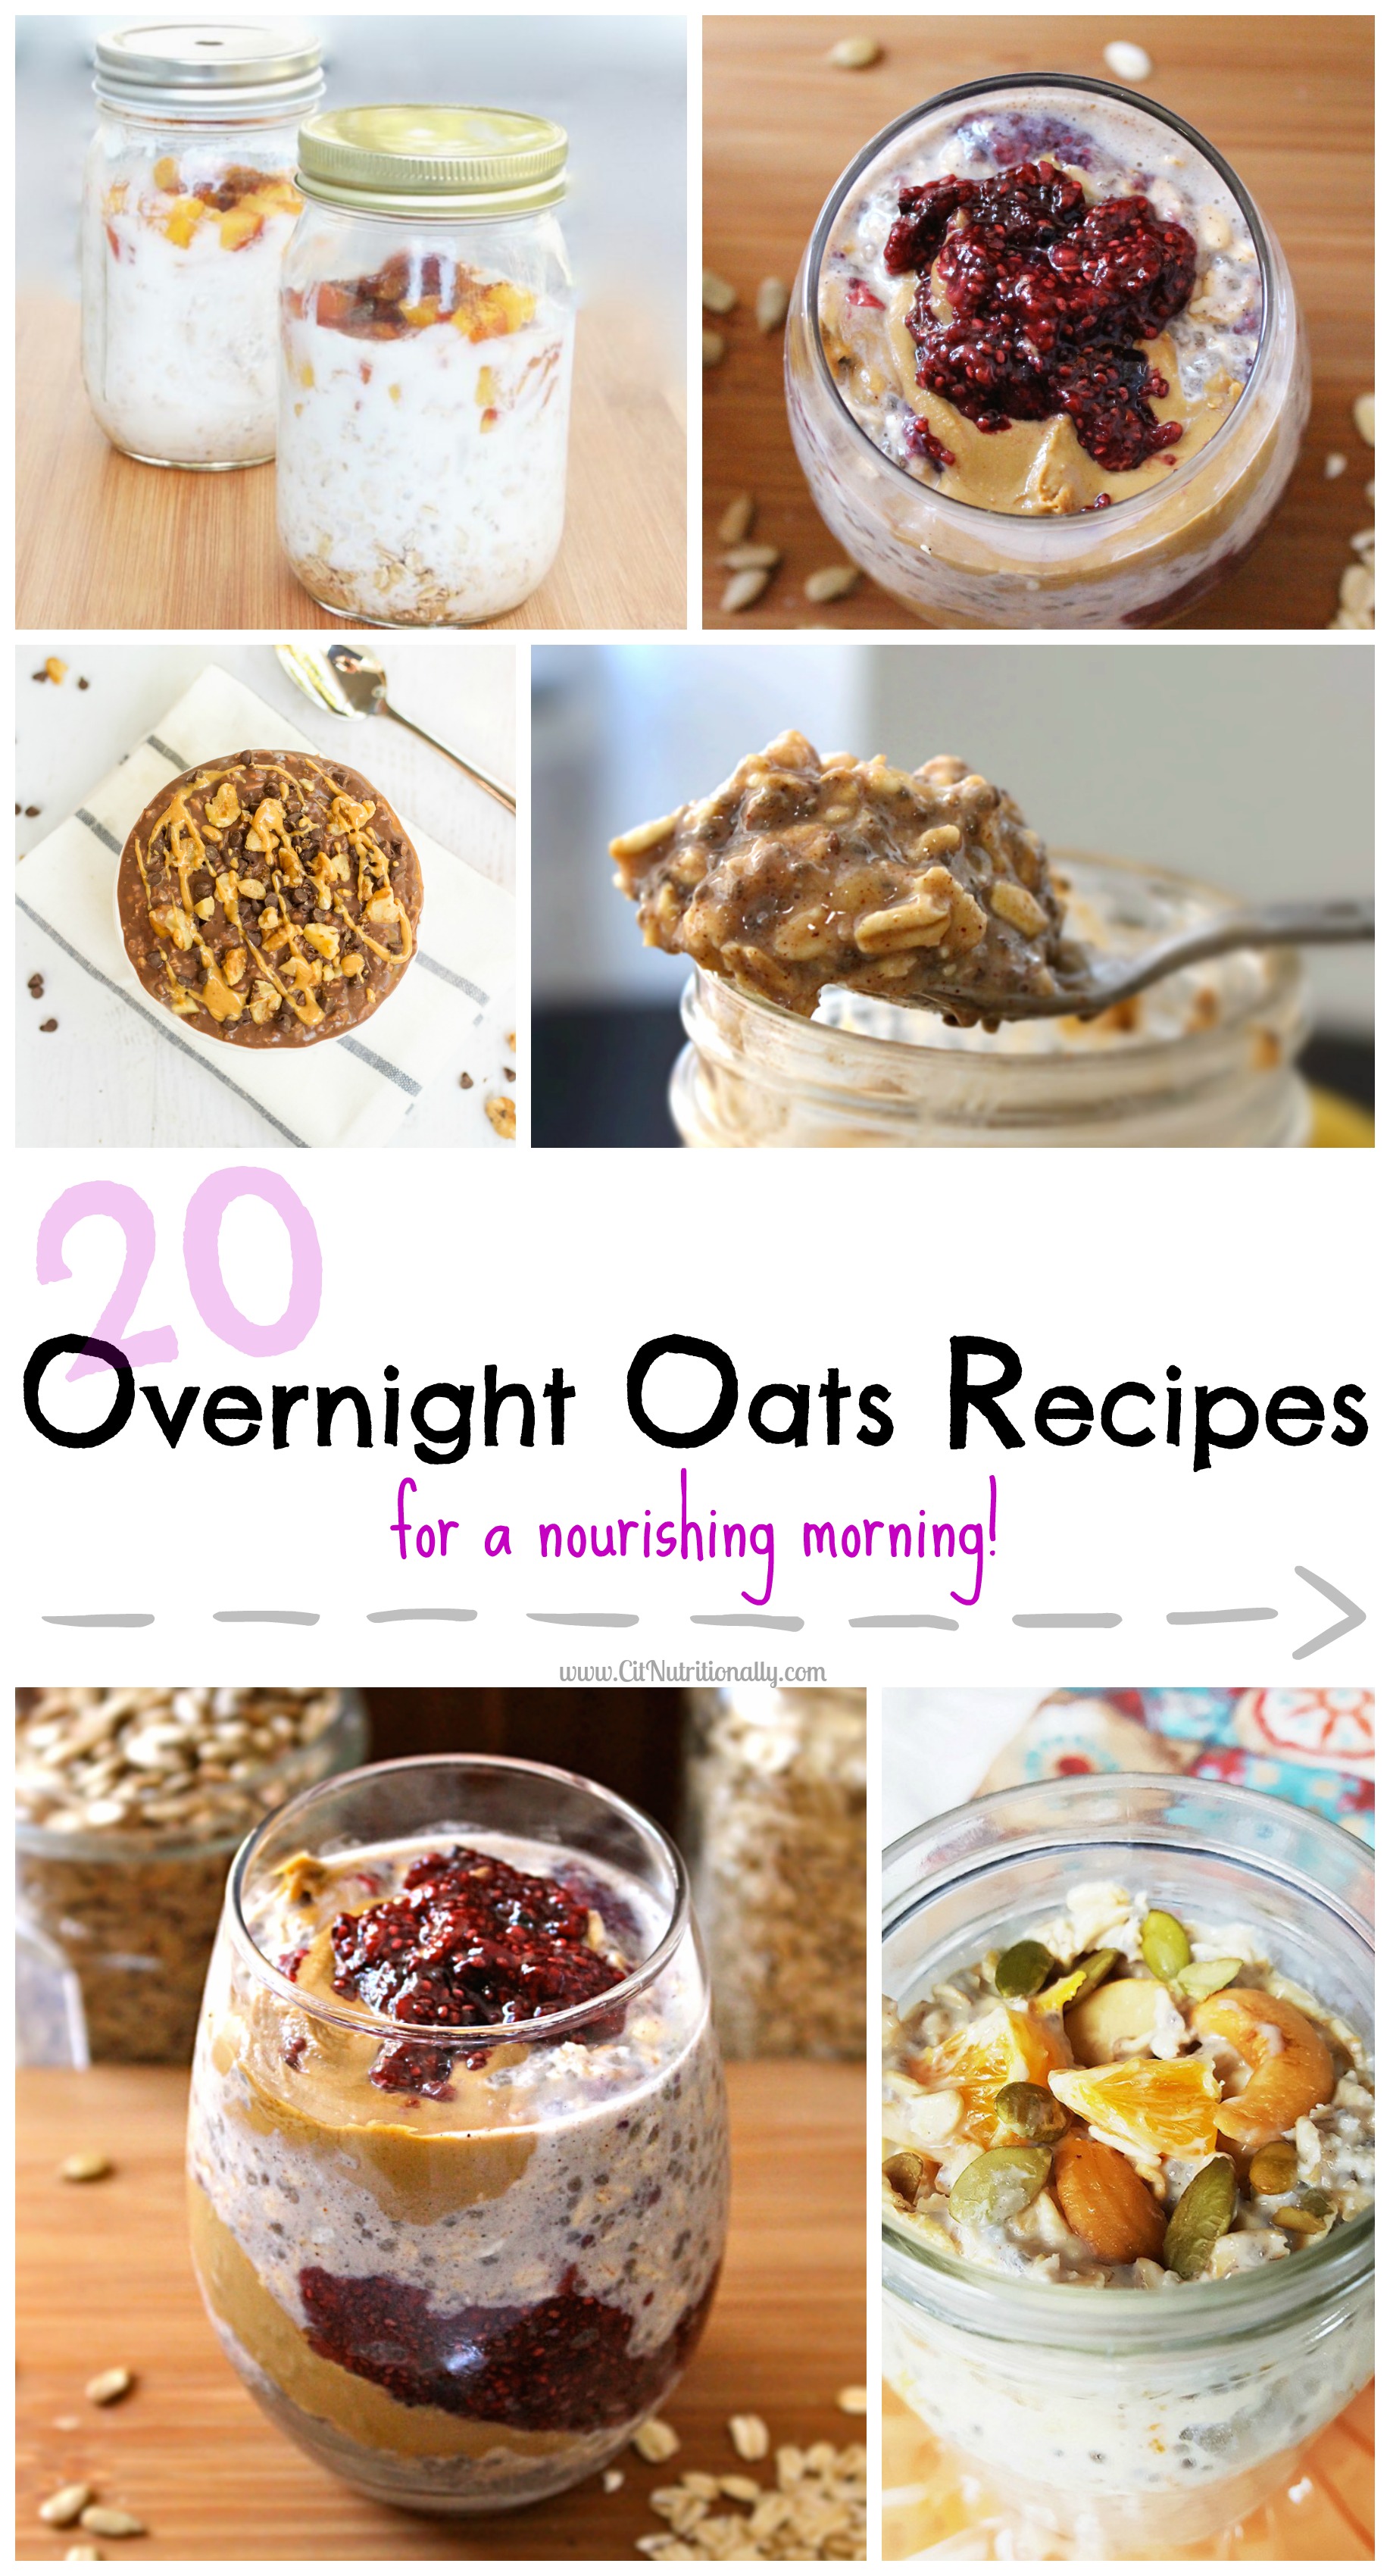 20 Overnight Oats Recipes for a Nourishing Morning - Chelsey Amer